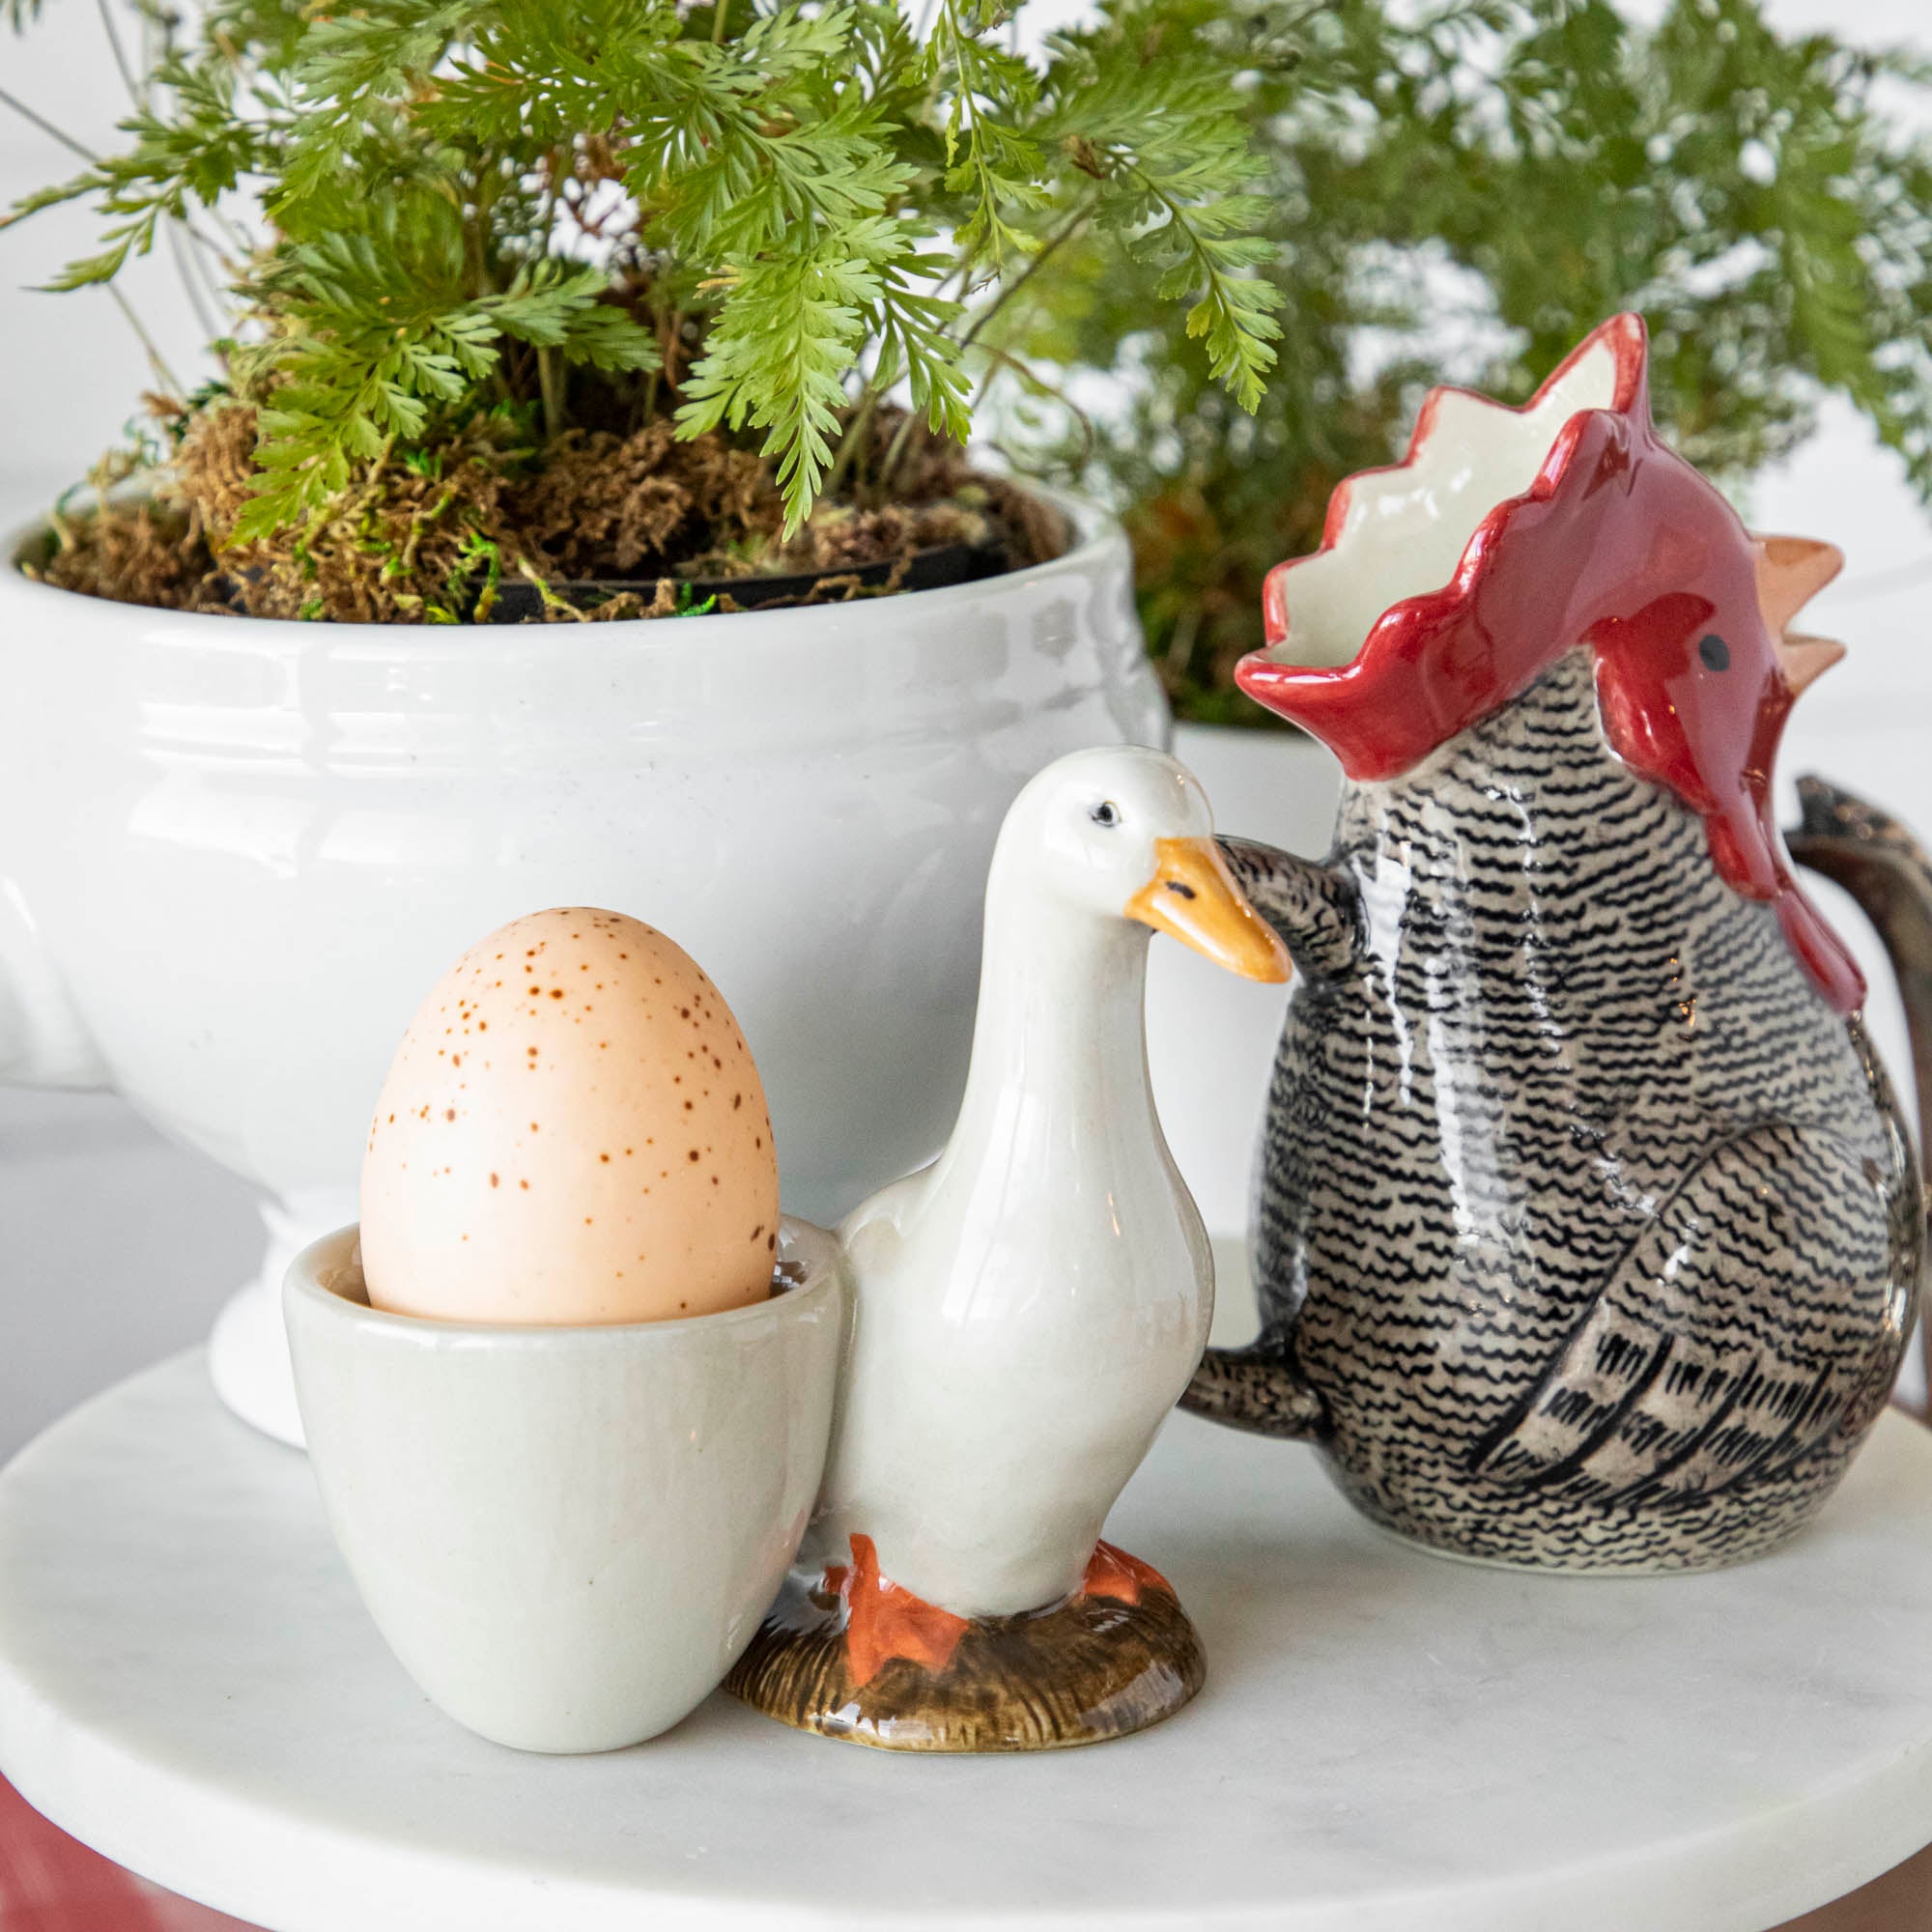 A quirky Farm Animal Ceramic rooster by British brand, Quail, sits next to a plant on a table.